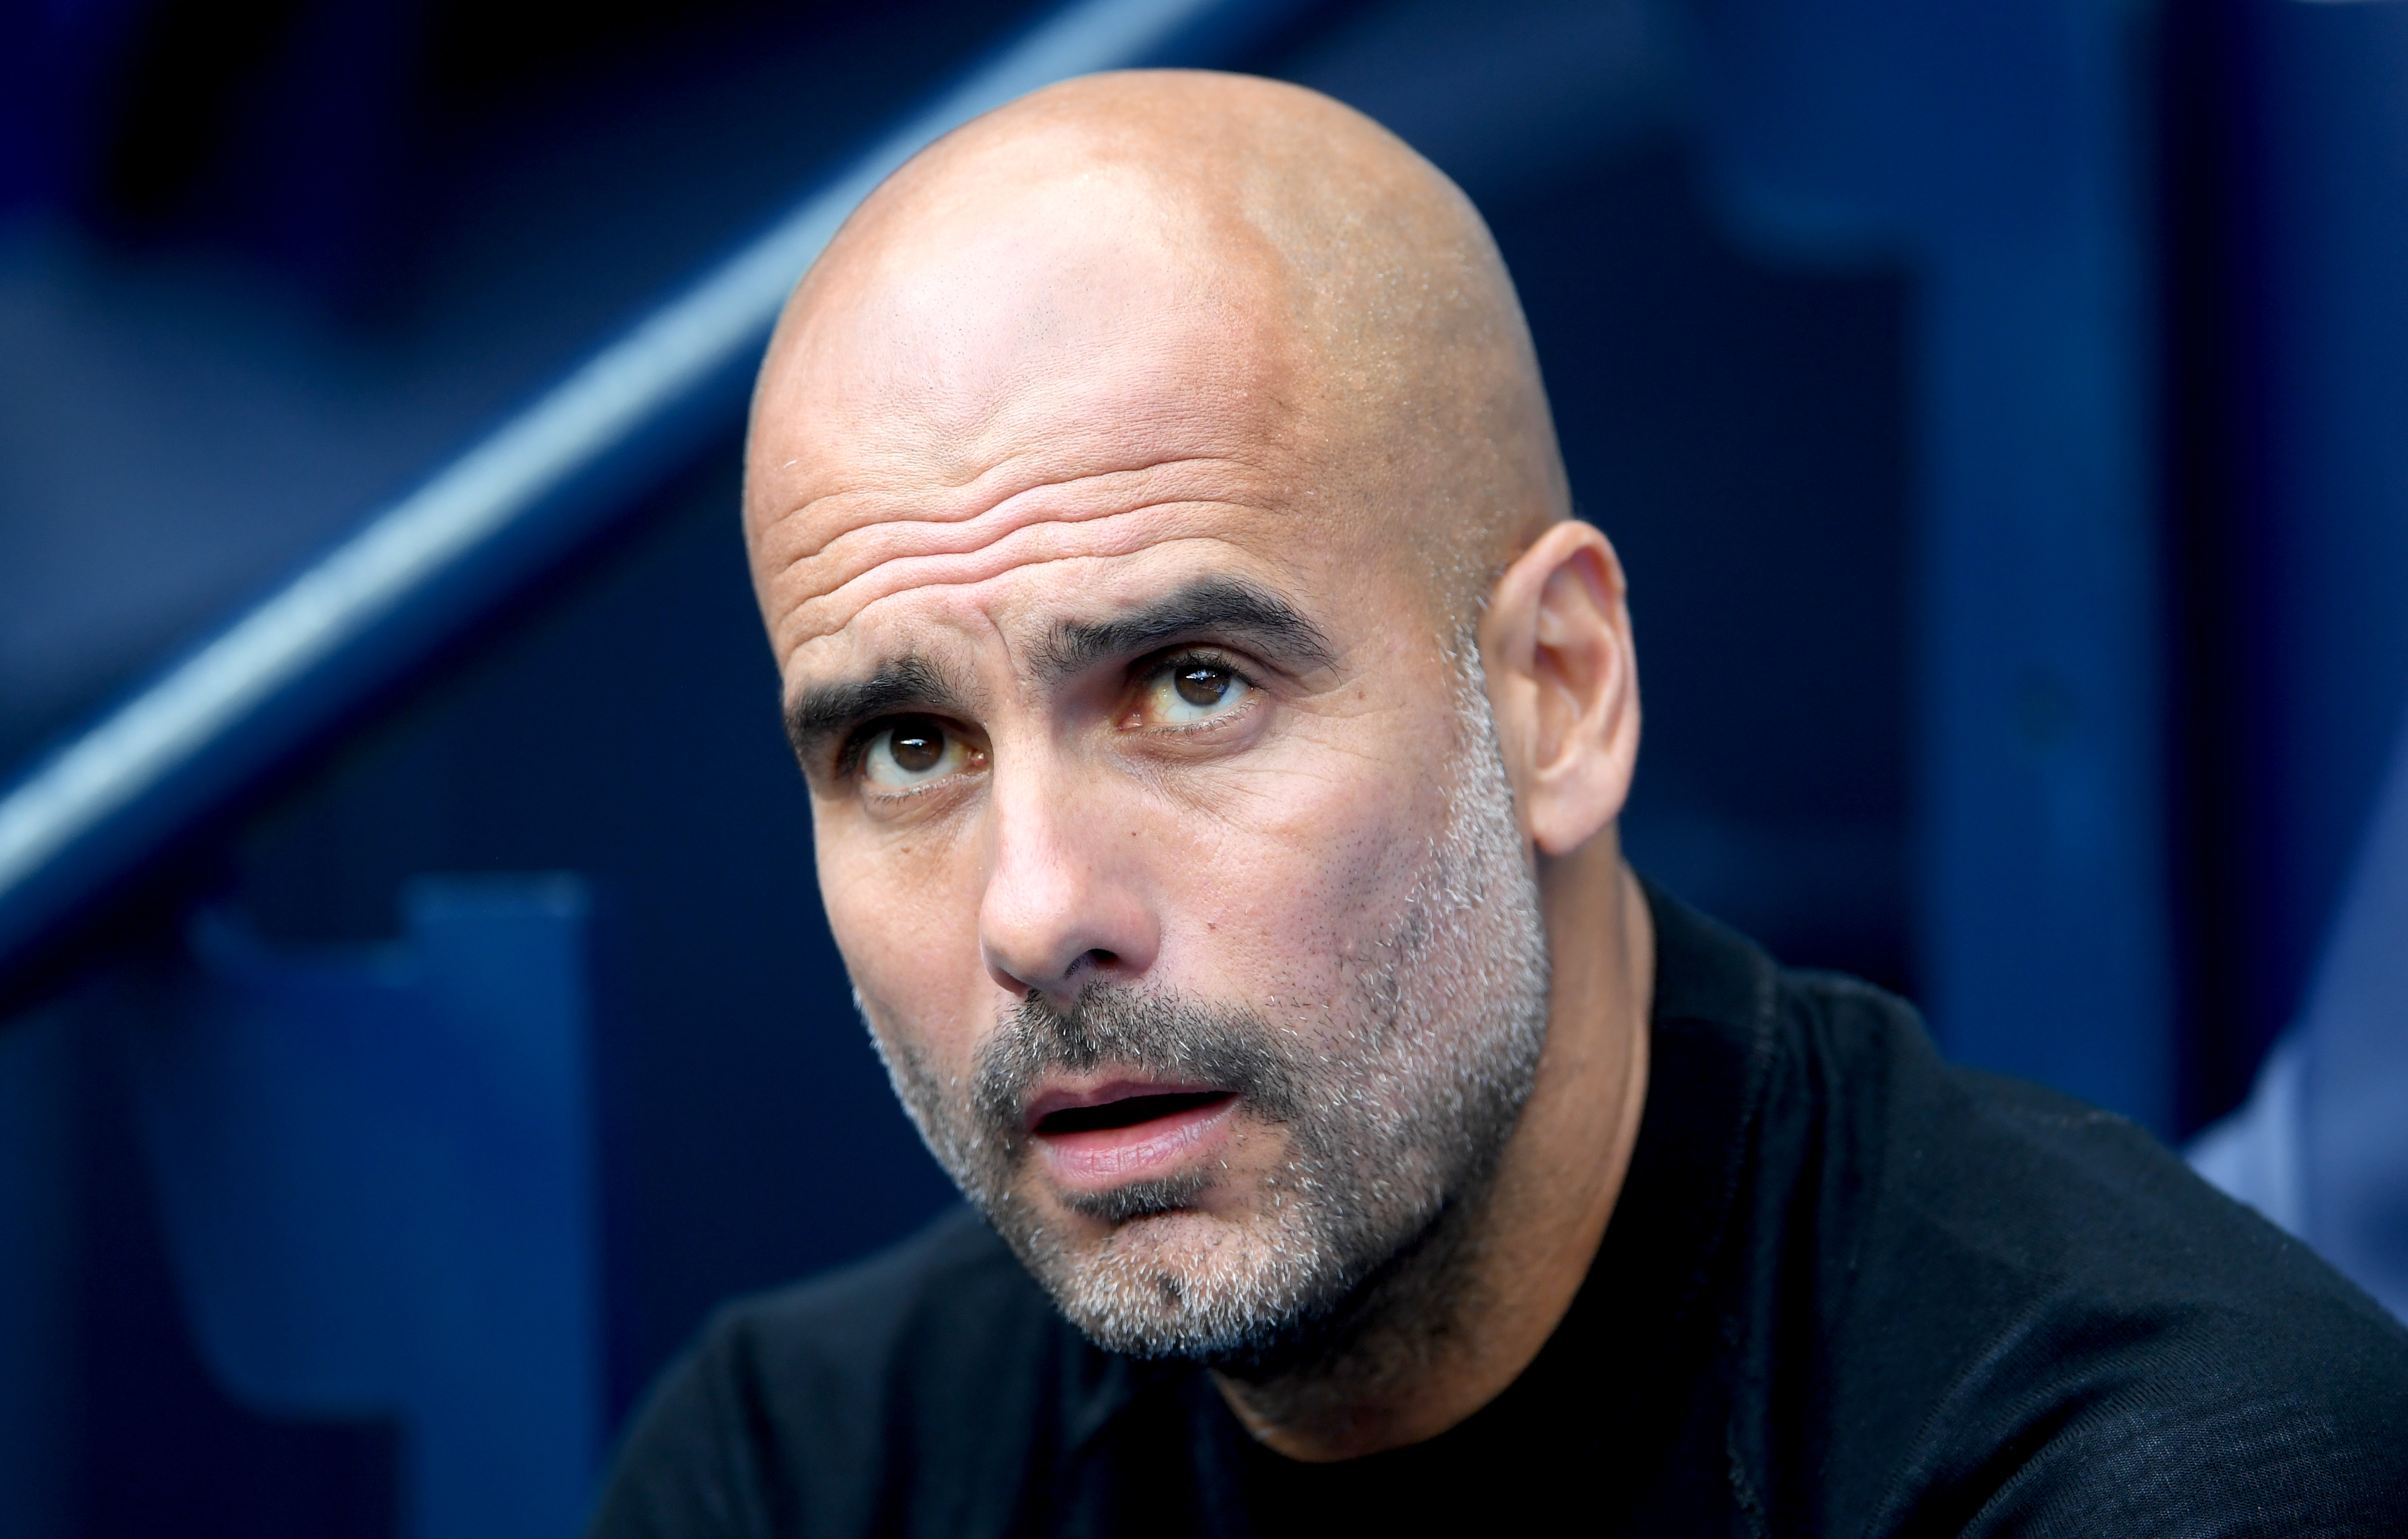 MANCHESTER, ENGLAND - SEPTEMBER 15:  Josep Guardiola, Manager of Manchester City looks on ahead of the Premier League match between Manchester City and Fulham FC at Etihad Stadium on September 15, 2018 in Manchester, United Kingdom.  (Photo by Laurence Griffiths/Getty Images)